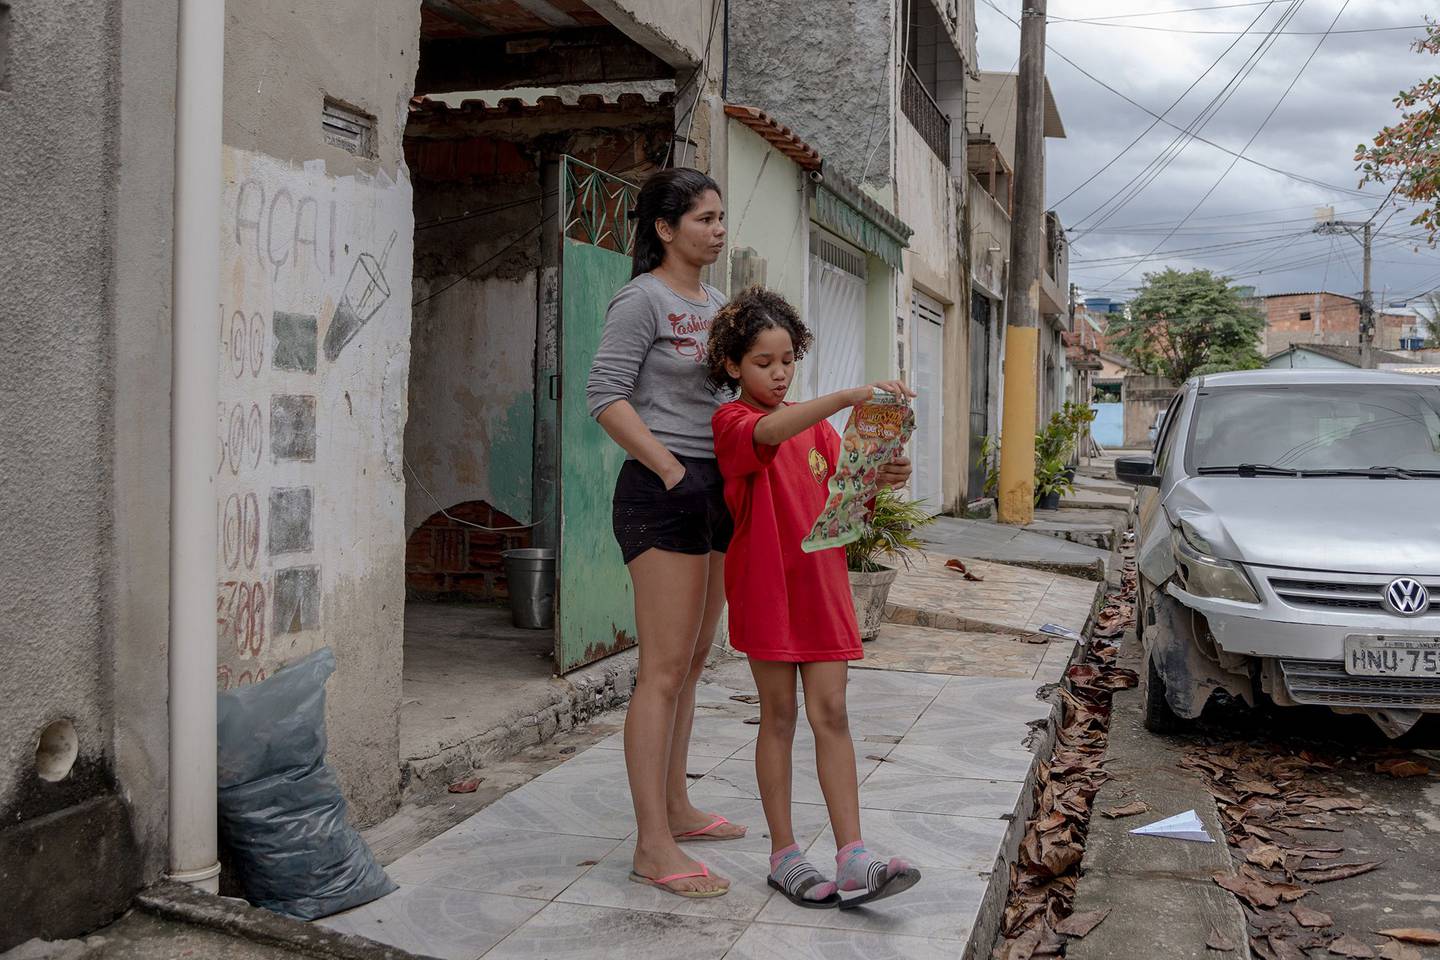 Jessica Couto with her daughter in front of their home in Rio de Janeiro.dfd